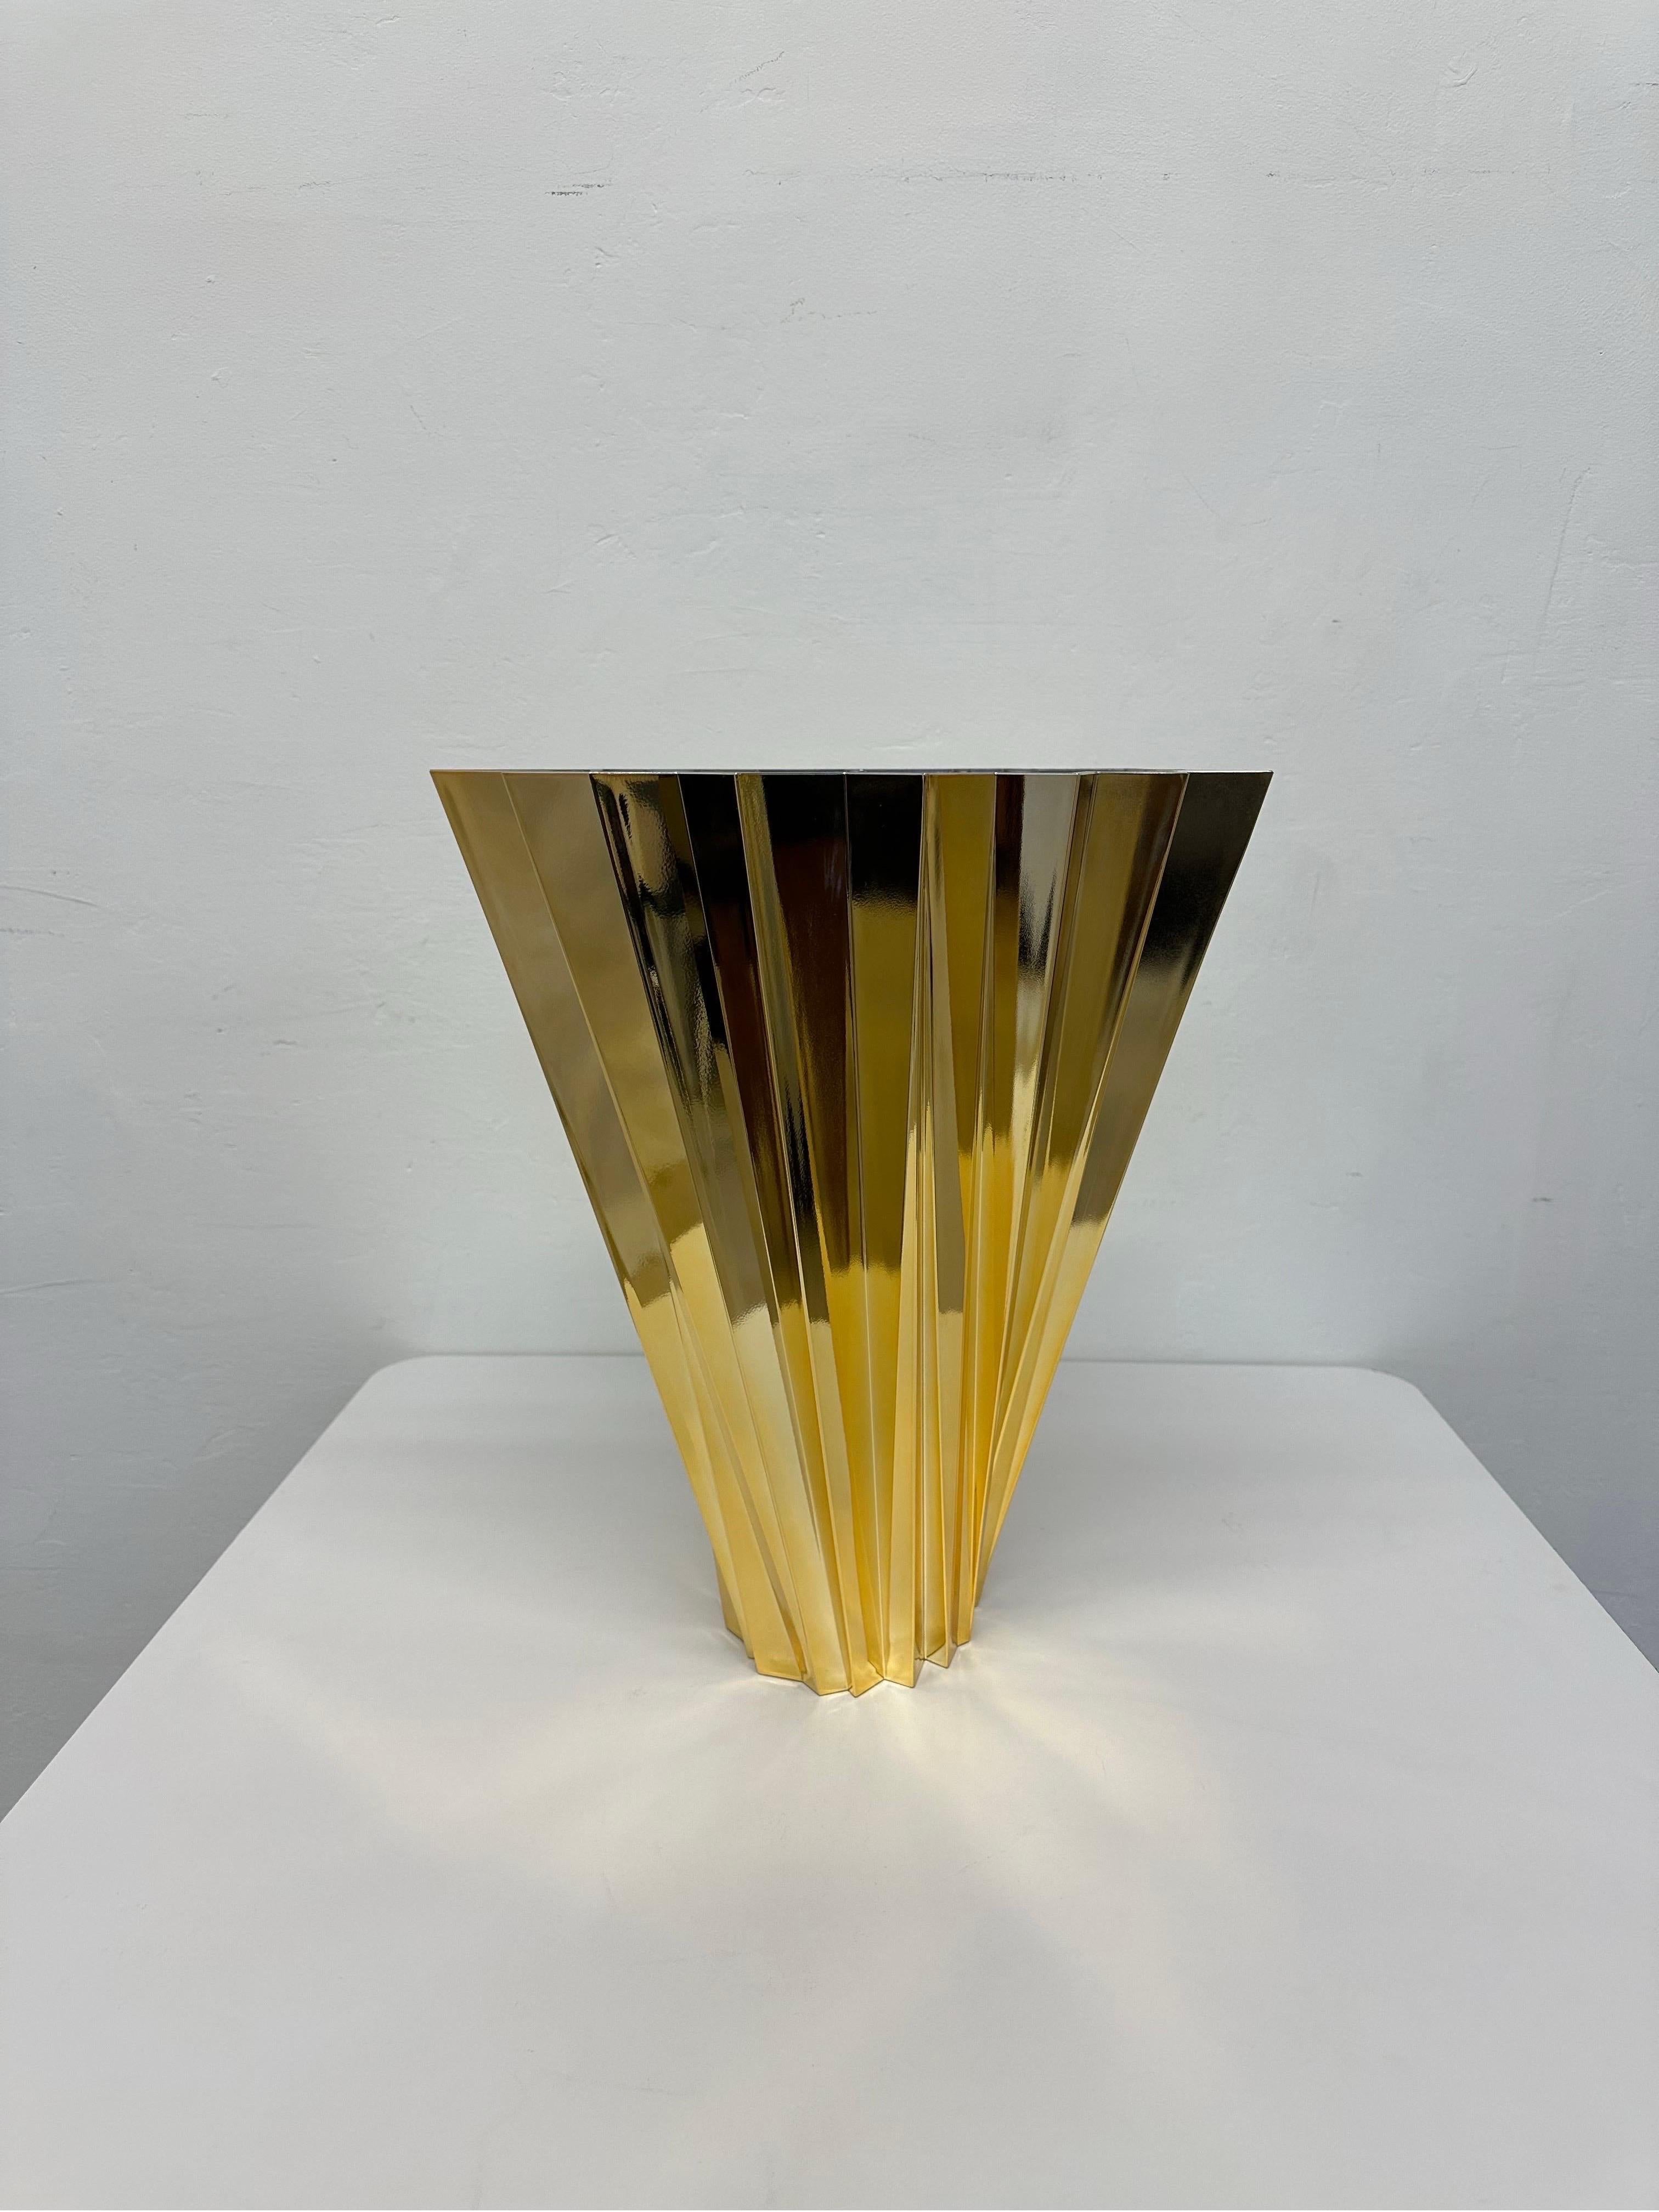 Gold Shanghai vase designed by Mario Bellini for Kartell.

A multi-faceted vase widening from the base to the top in a swirling motion. Shanghai is like refracted light radiating from prism-like crystals with an alternating play of flashes and